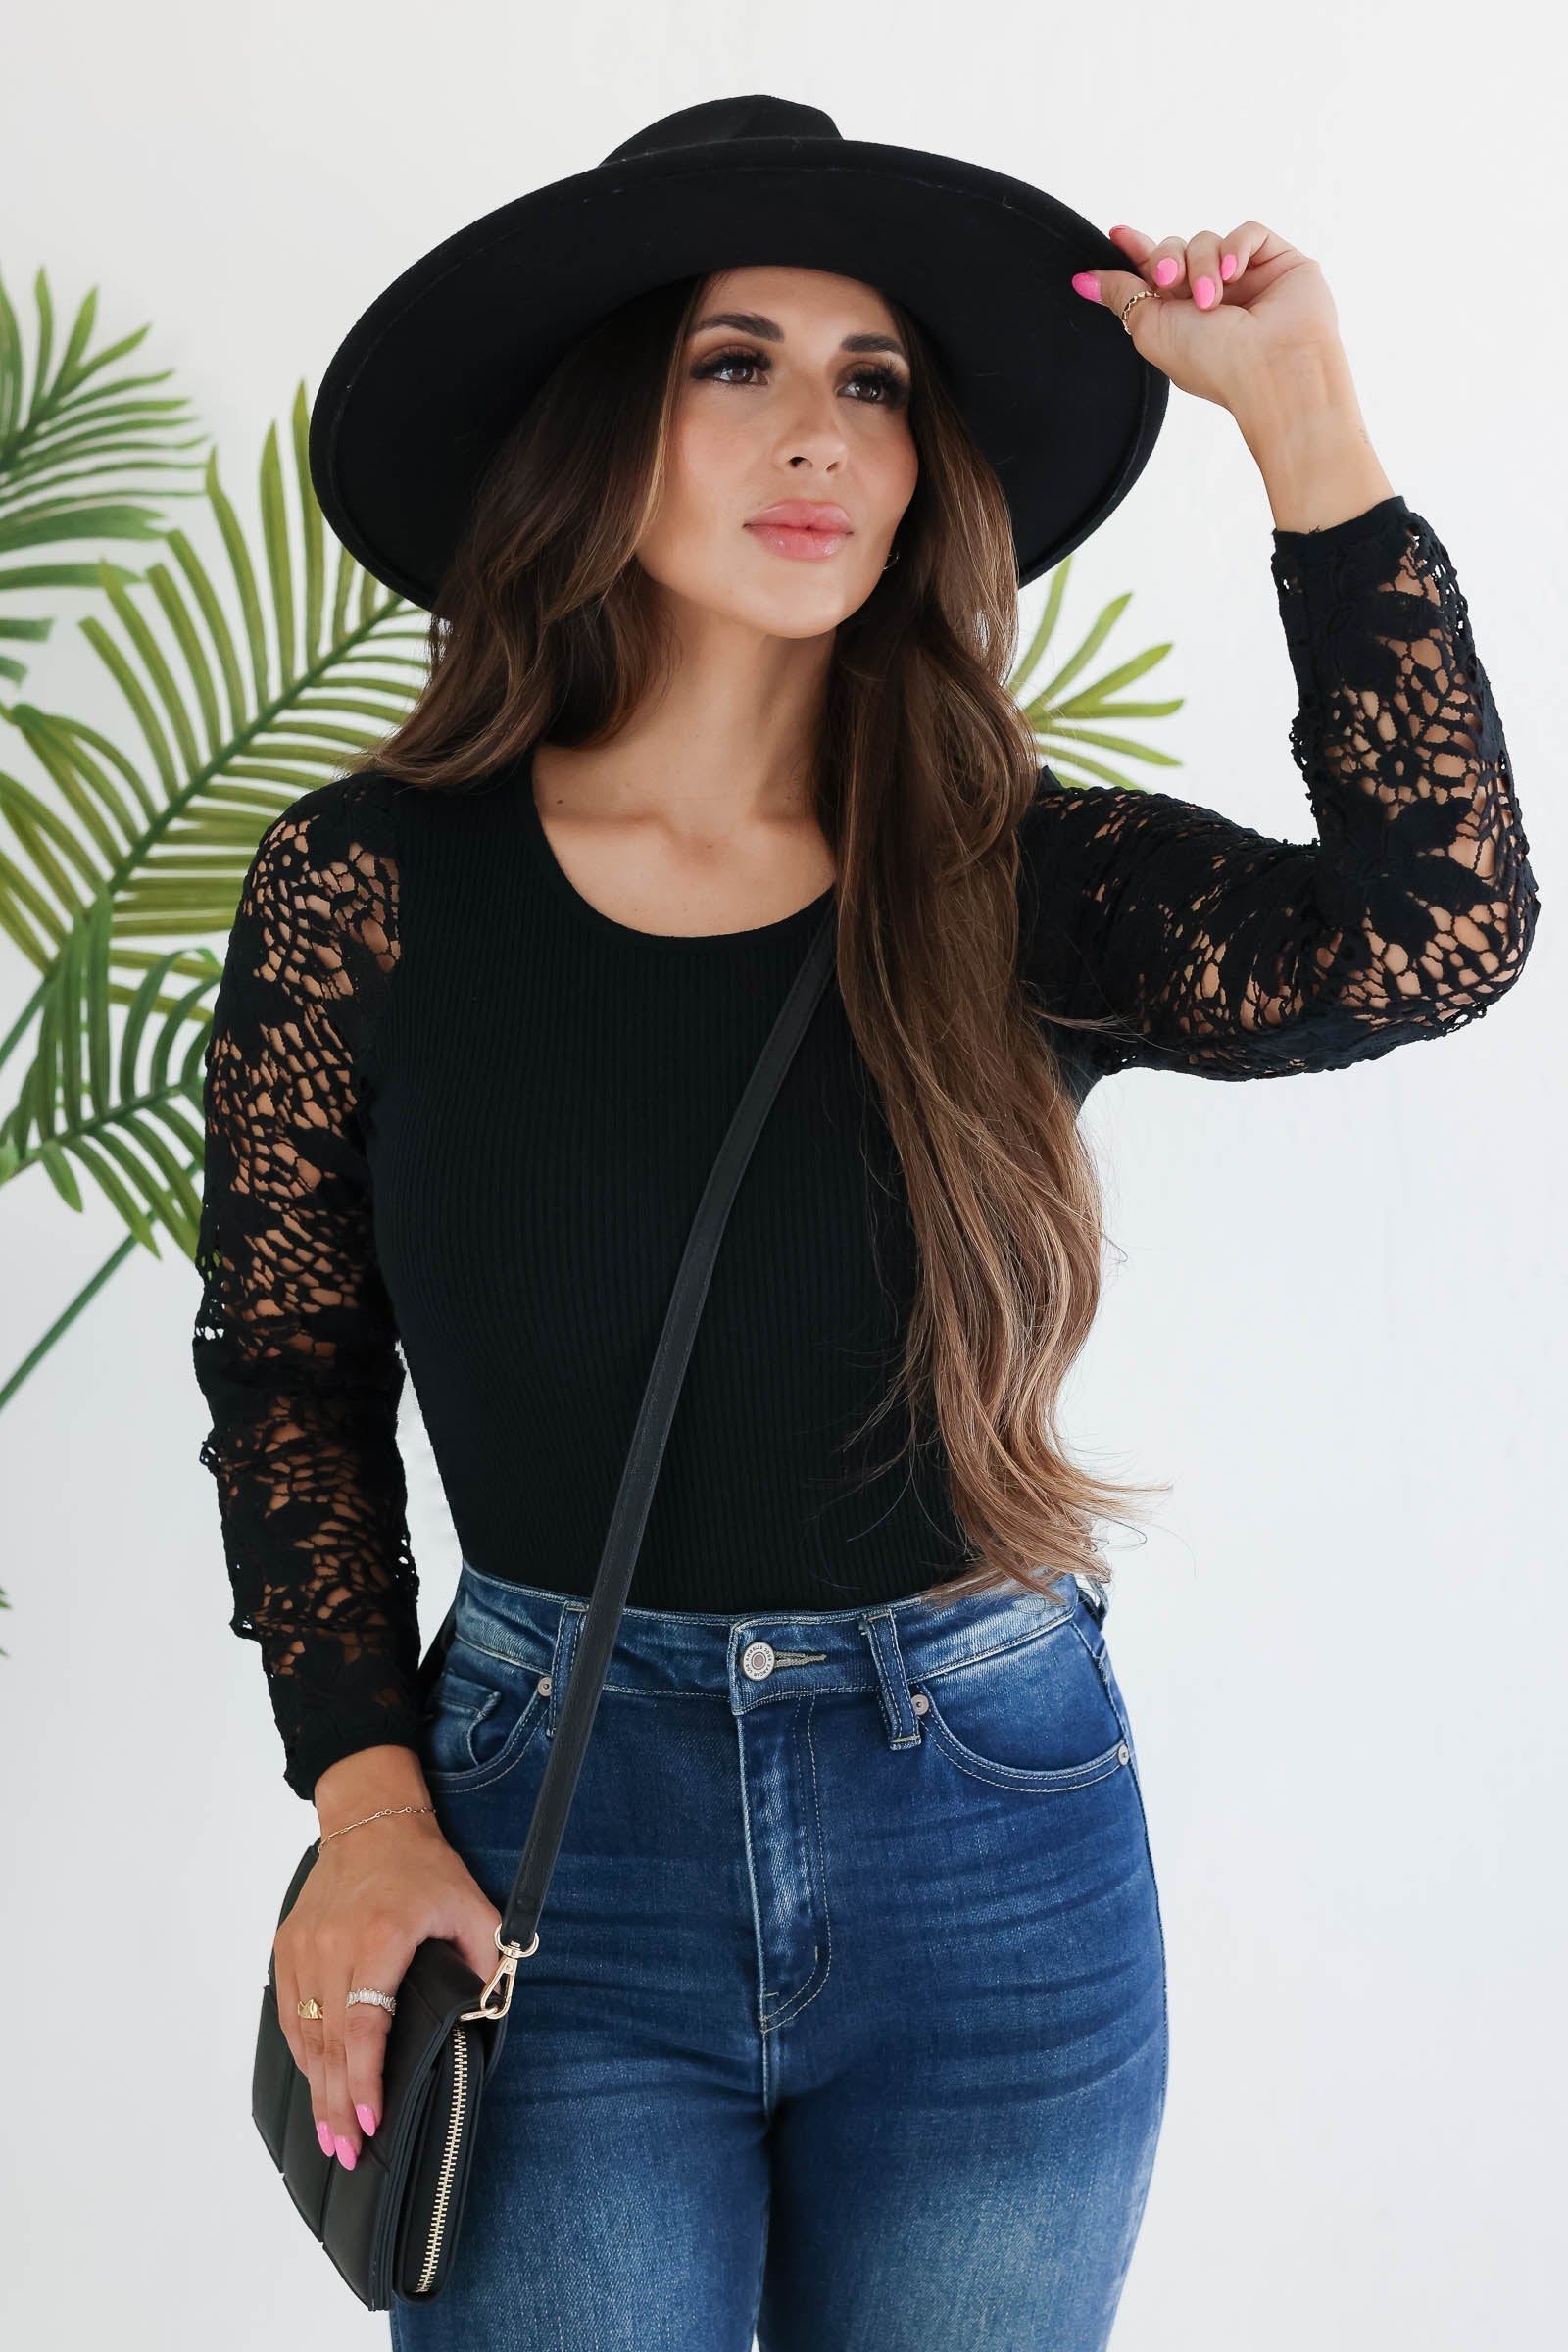 The Best Part Lace Sleeve Top - Black, Closet Candy, 1